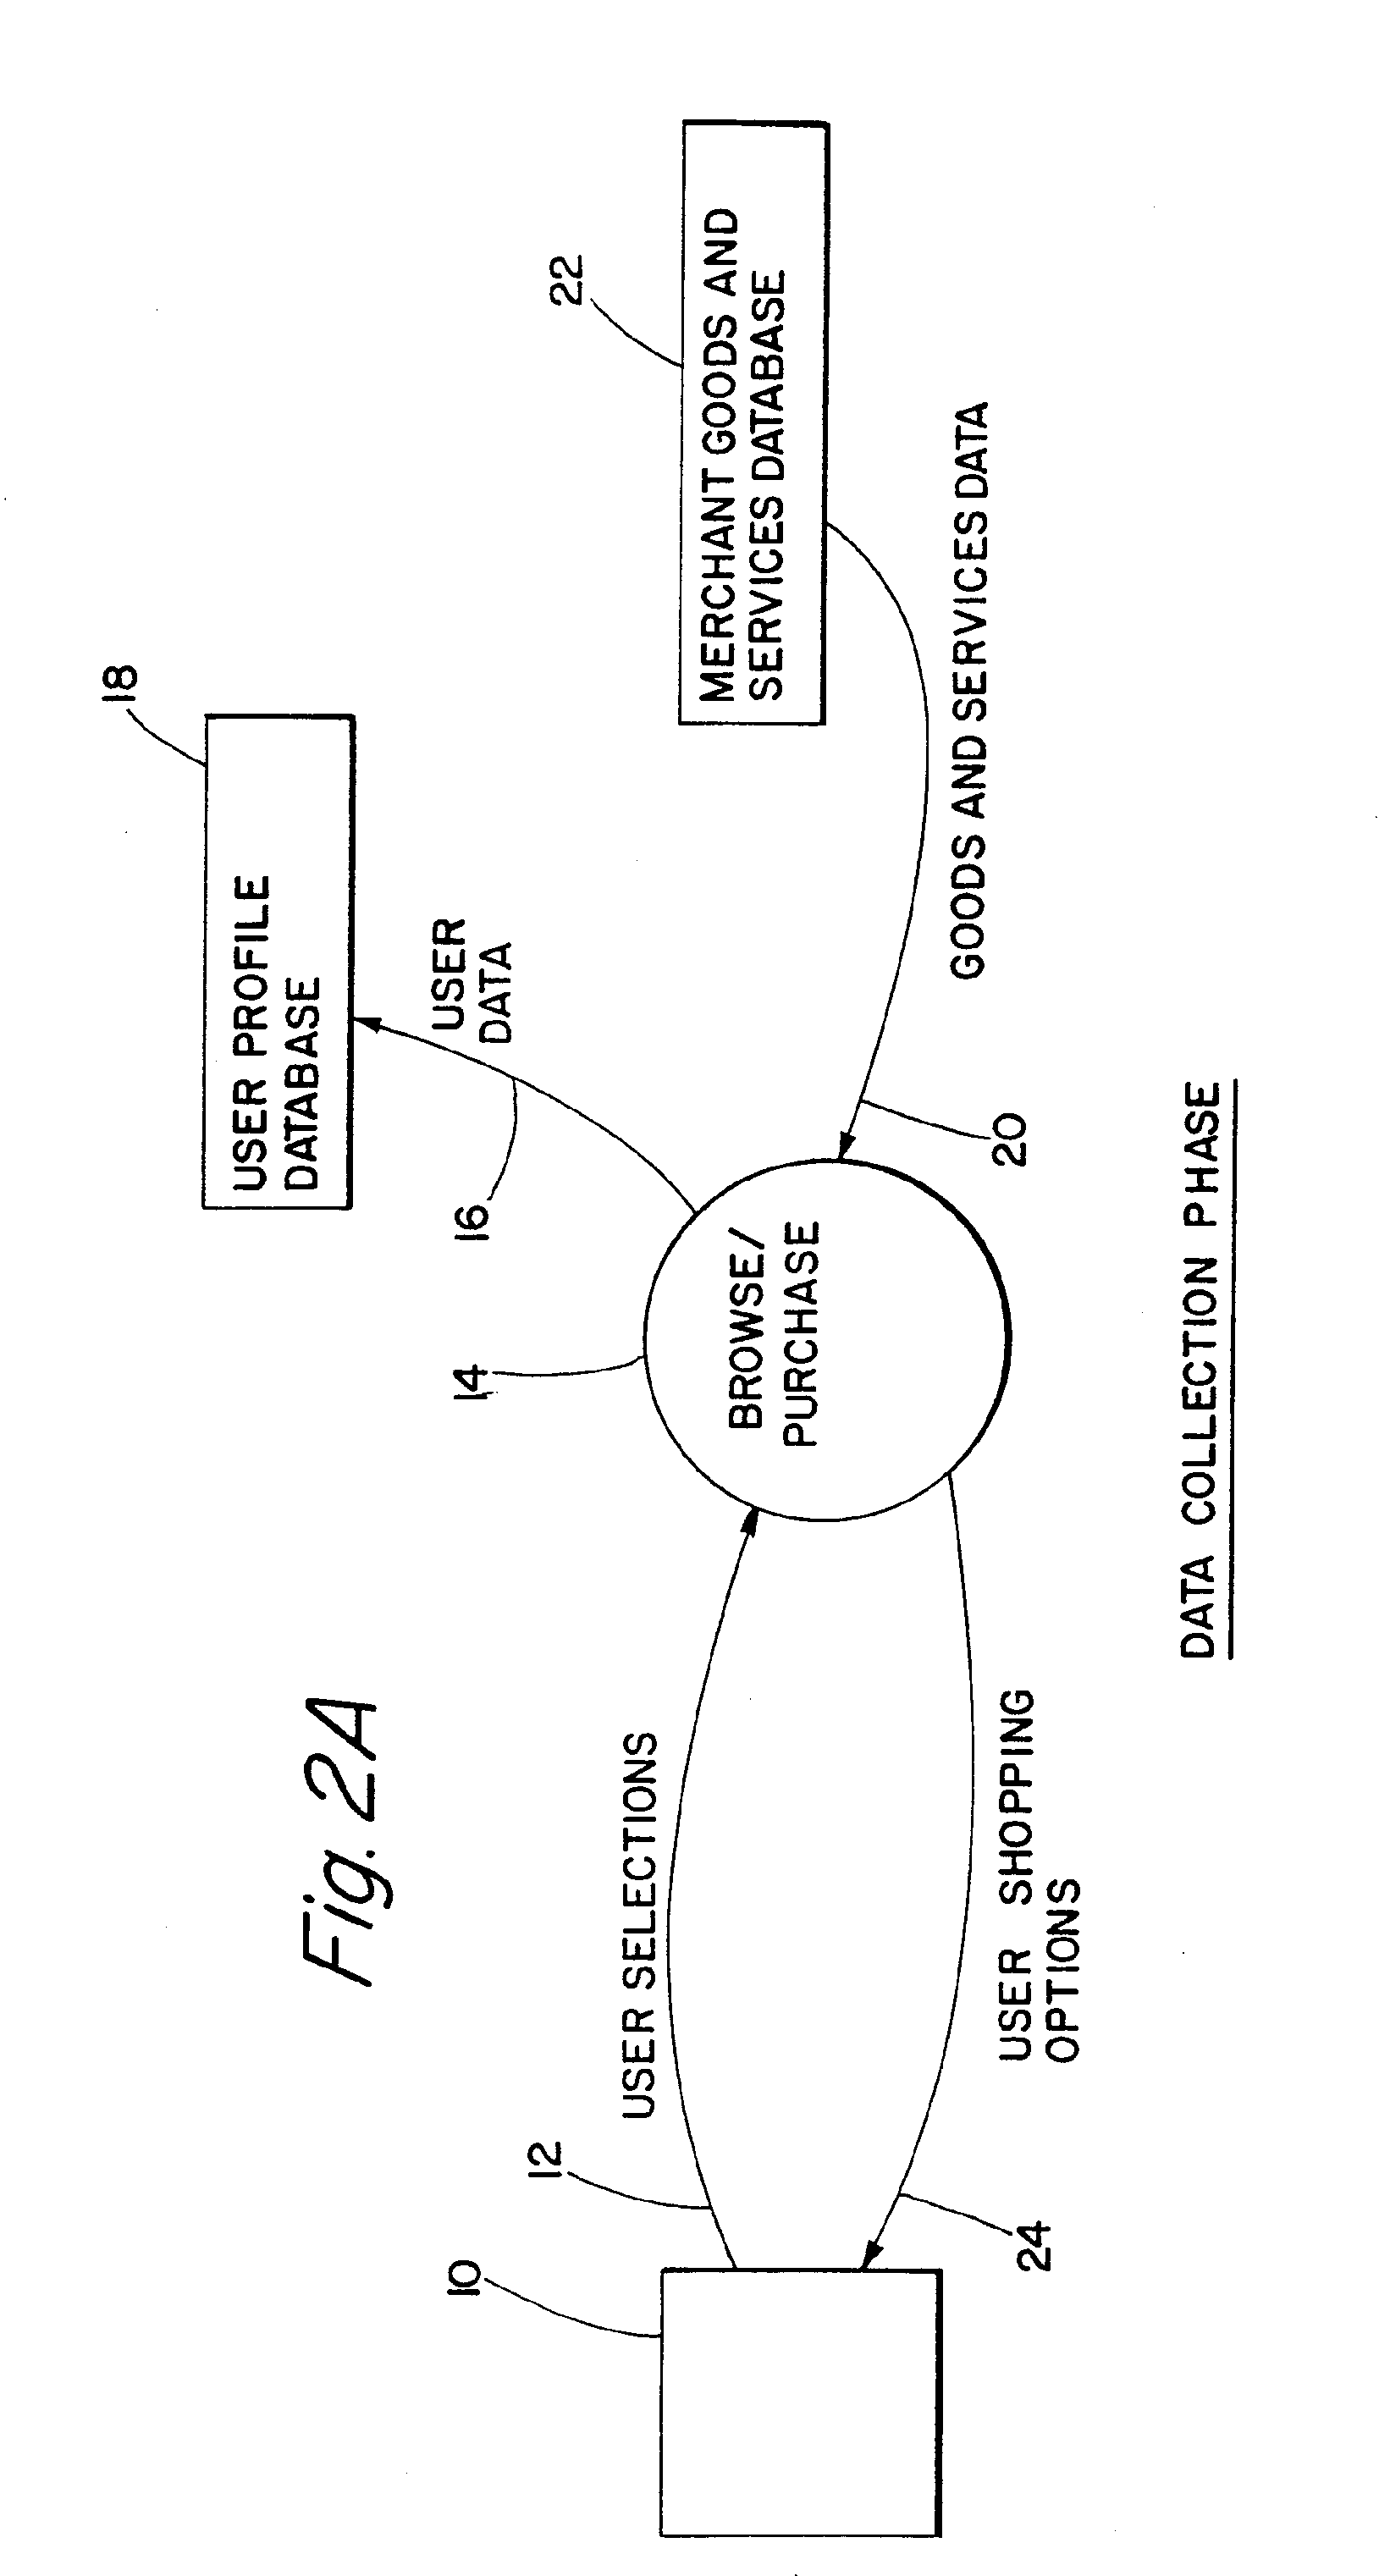 Method and medium for customizing the presentation of content displayed to a user